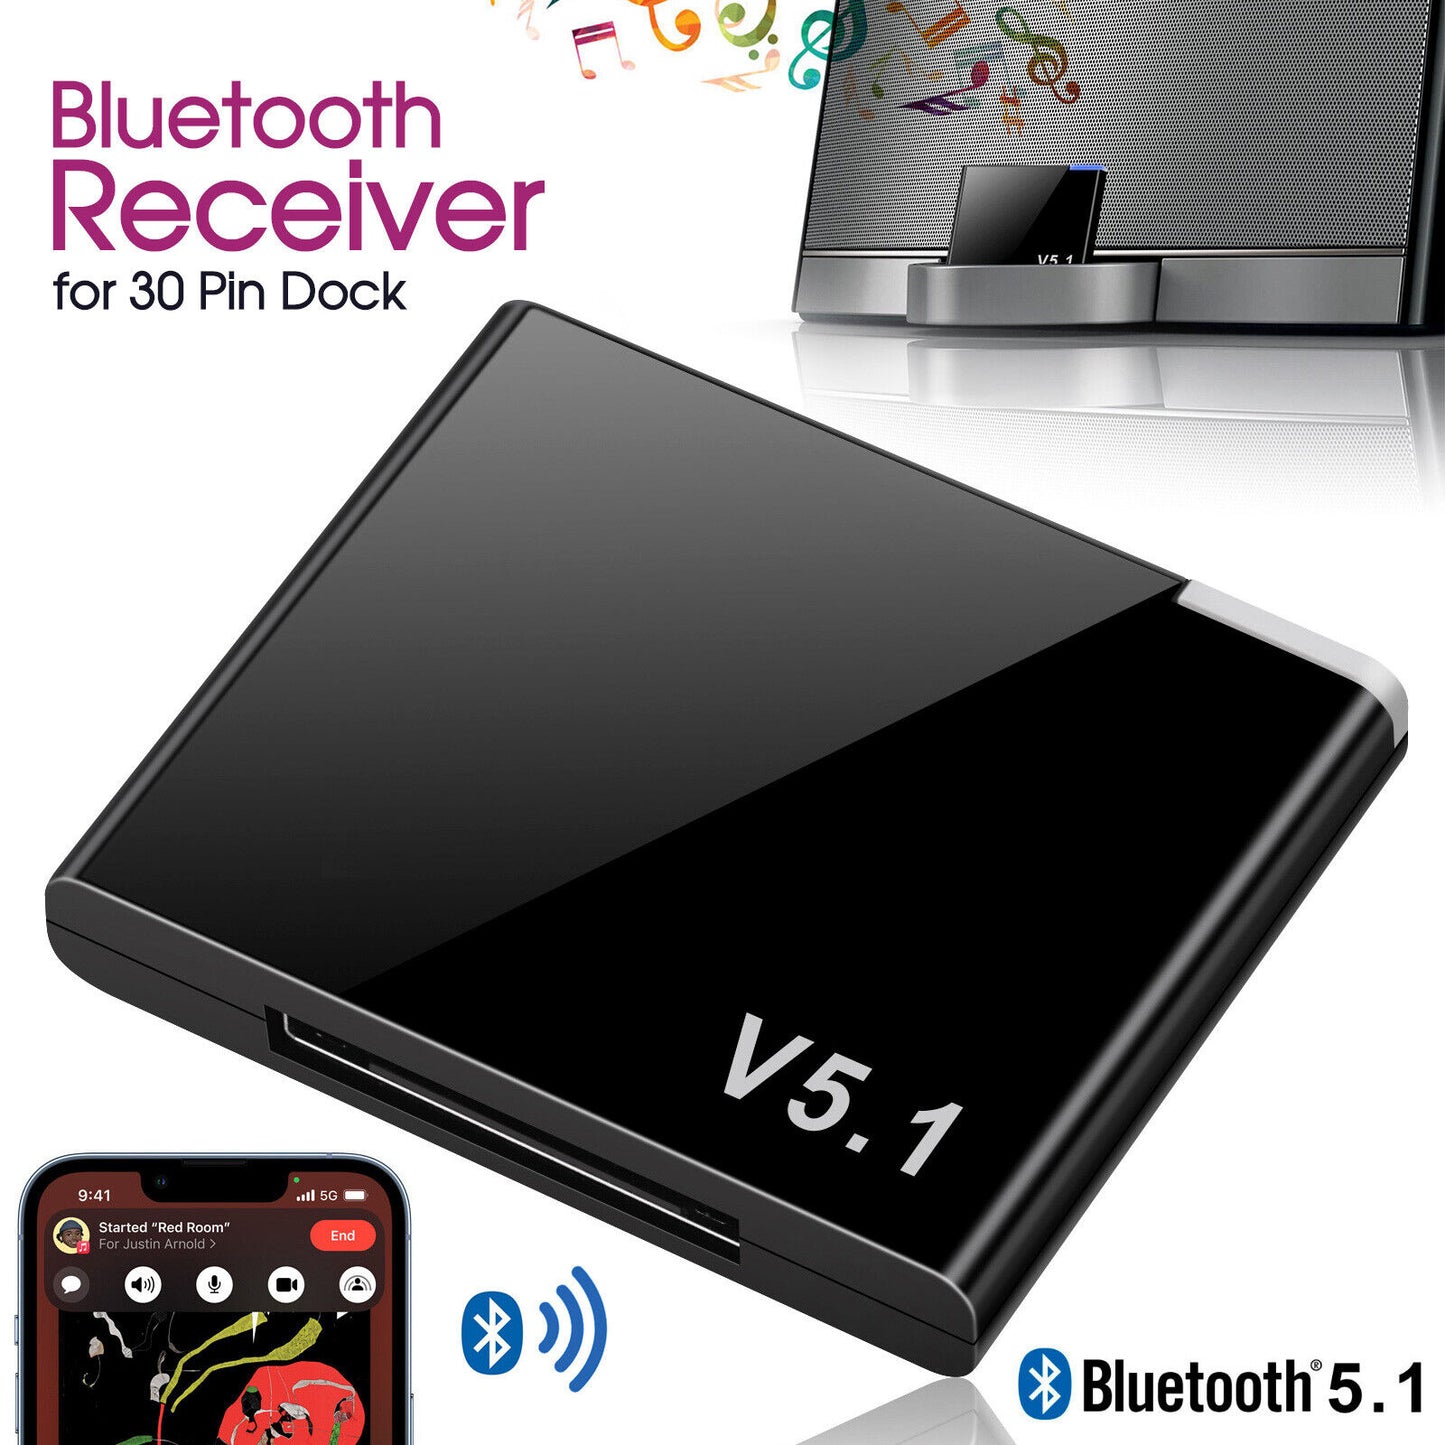 Bluetooth 5.1 Music Audio Adapter Receiver 30 Pin Dock Speaker for iPhone iPod